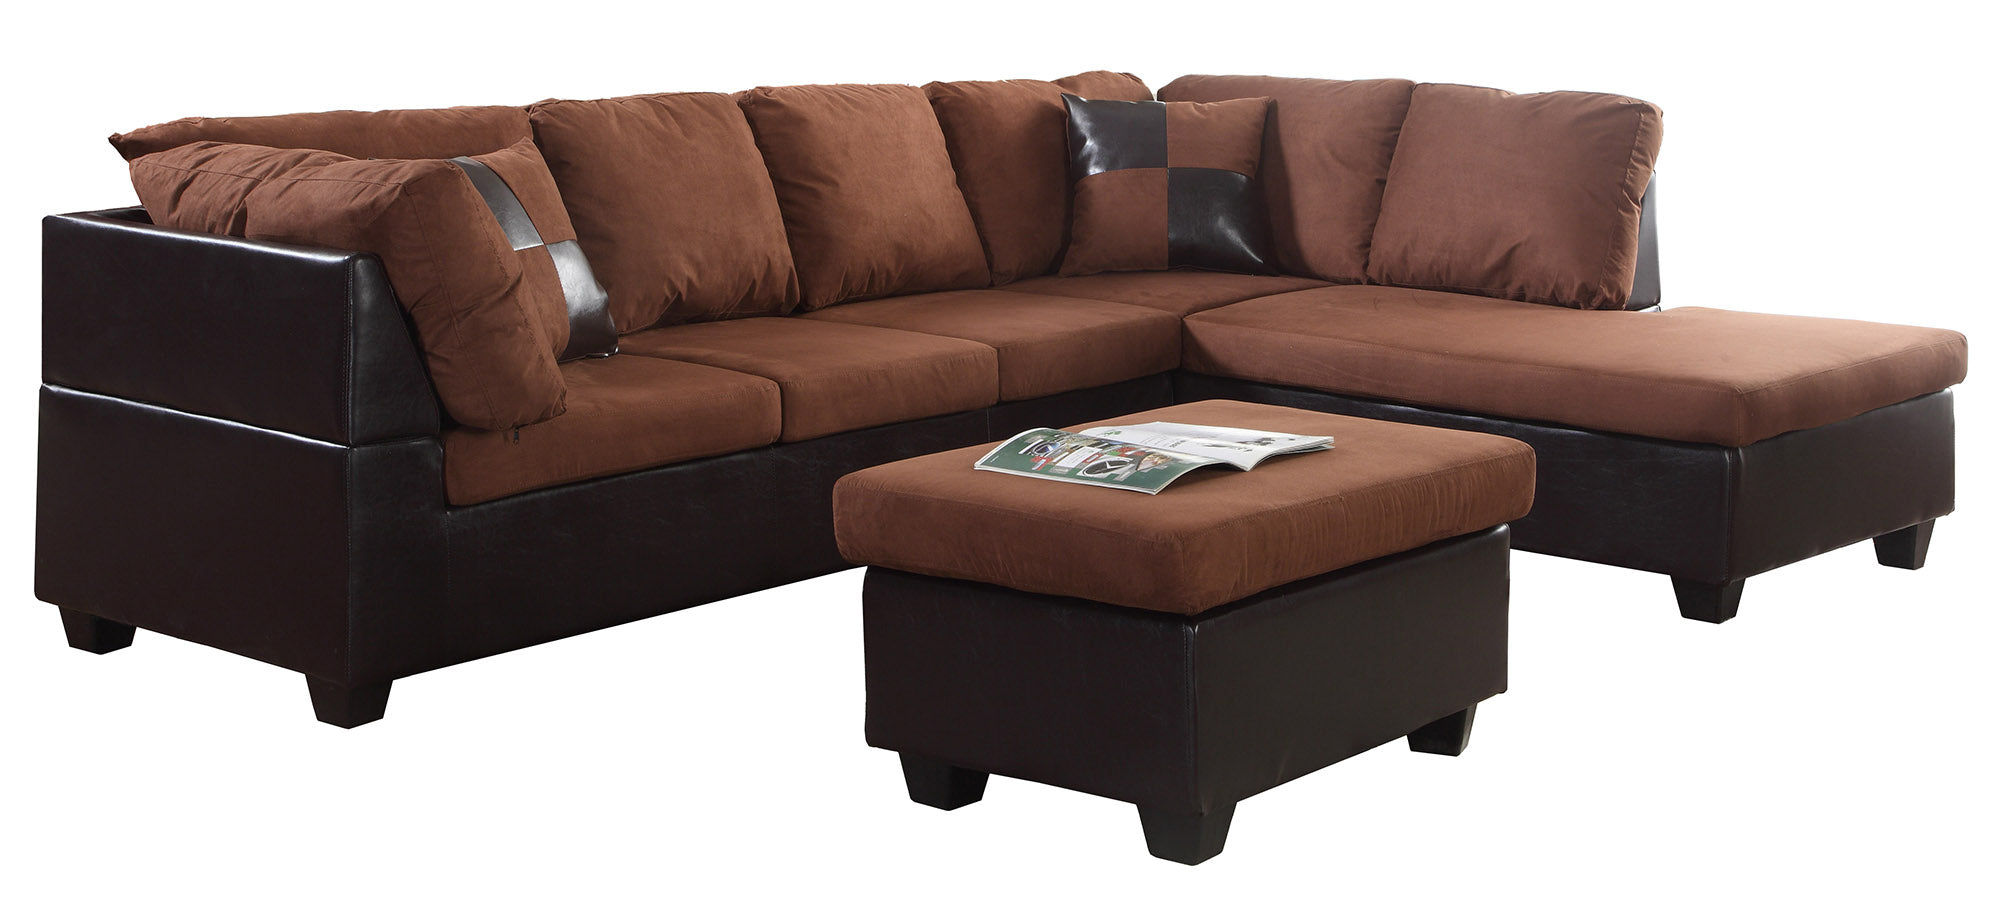 Olivia Sectional With Ottoman